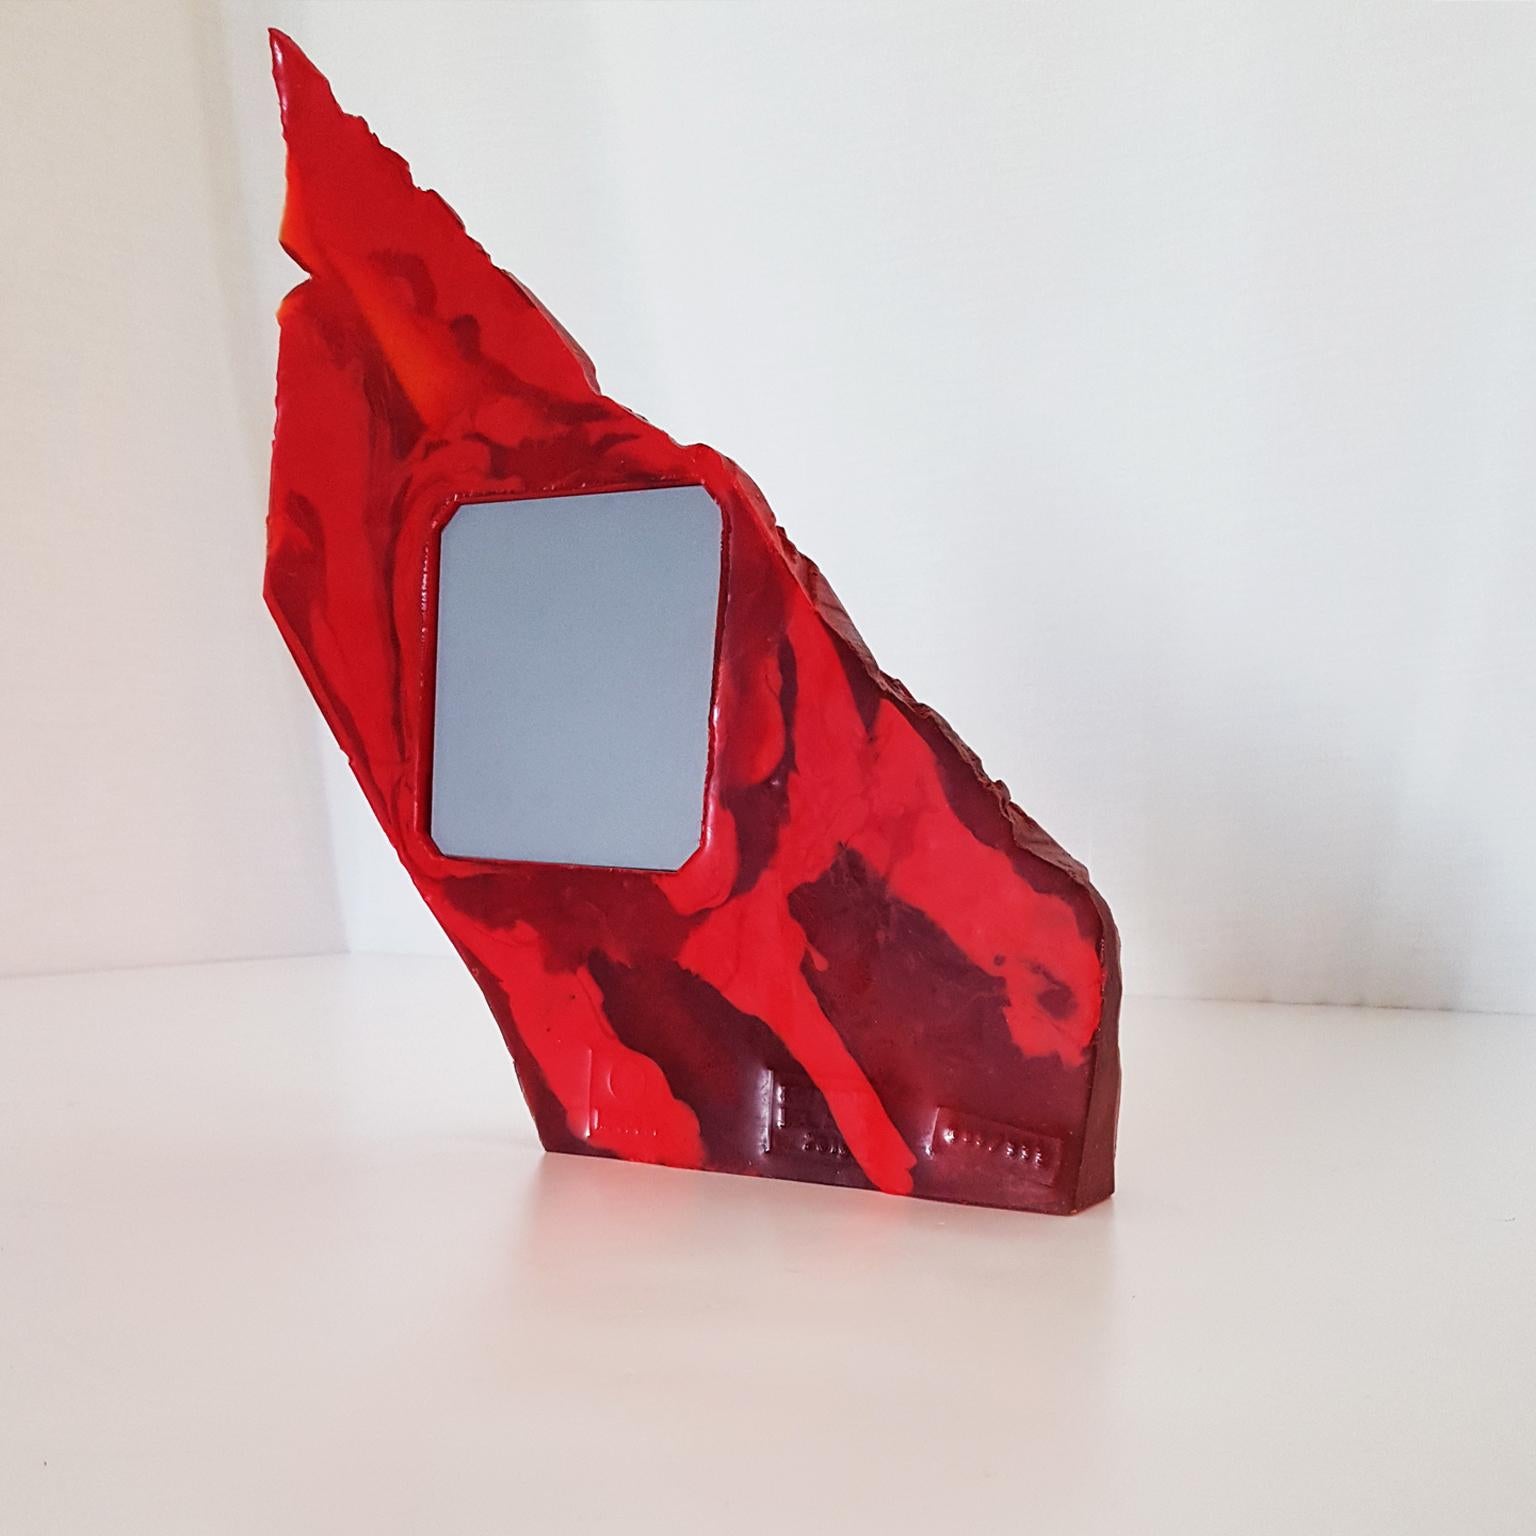 Gaetano Pesce Italian Contemporary Picture Frame in Red Resin, Limited Edition For Sale 6